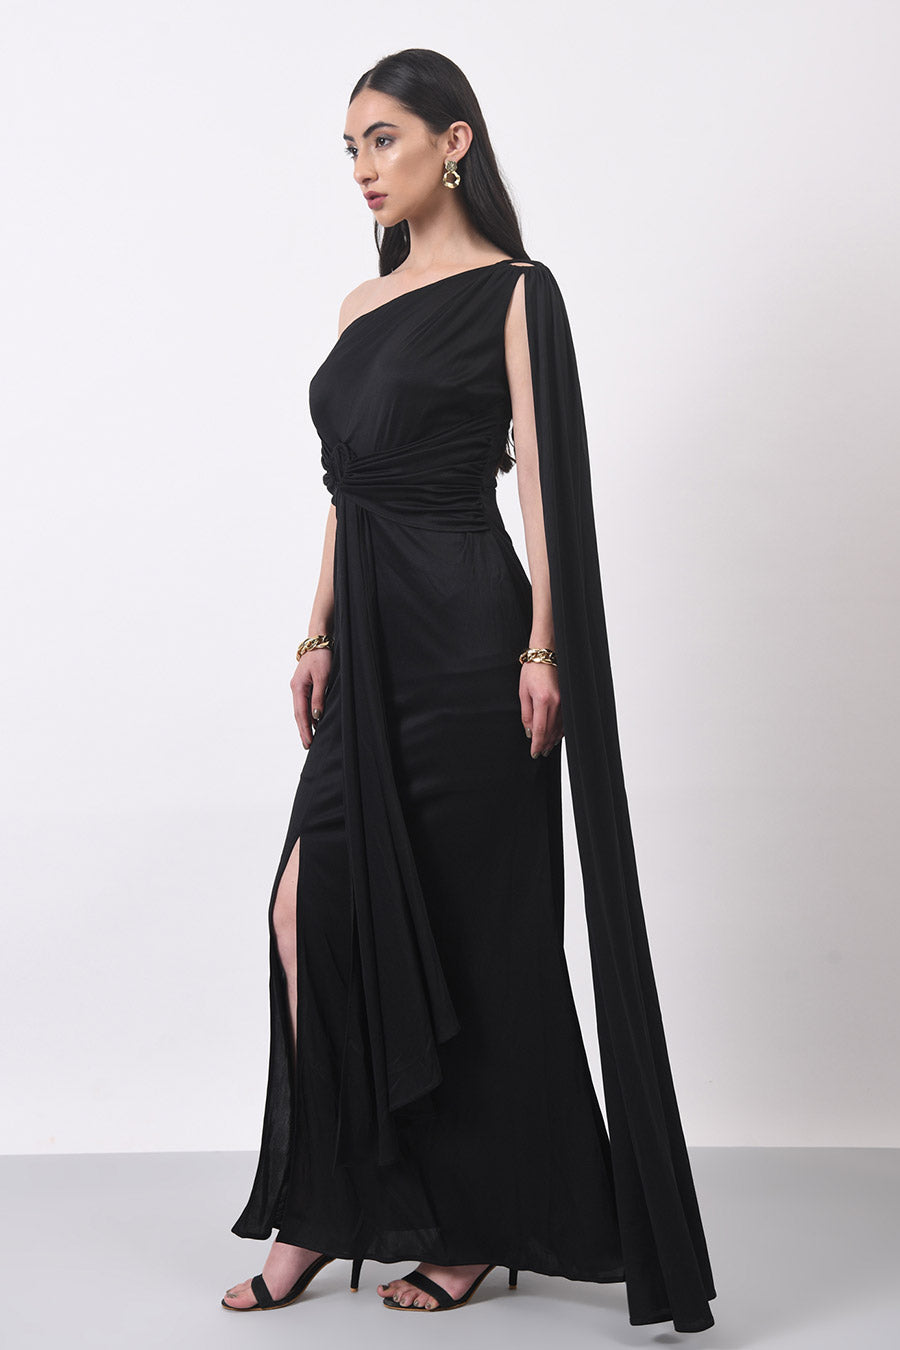 Gorgeous Black to Red Ombre Ball Gown with Cape Wrap - Lunss